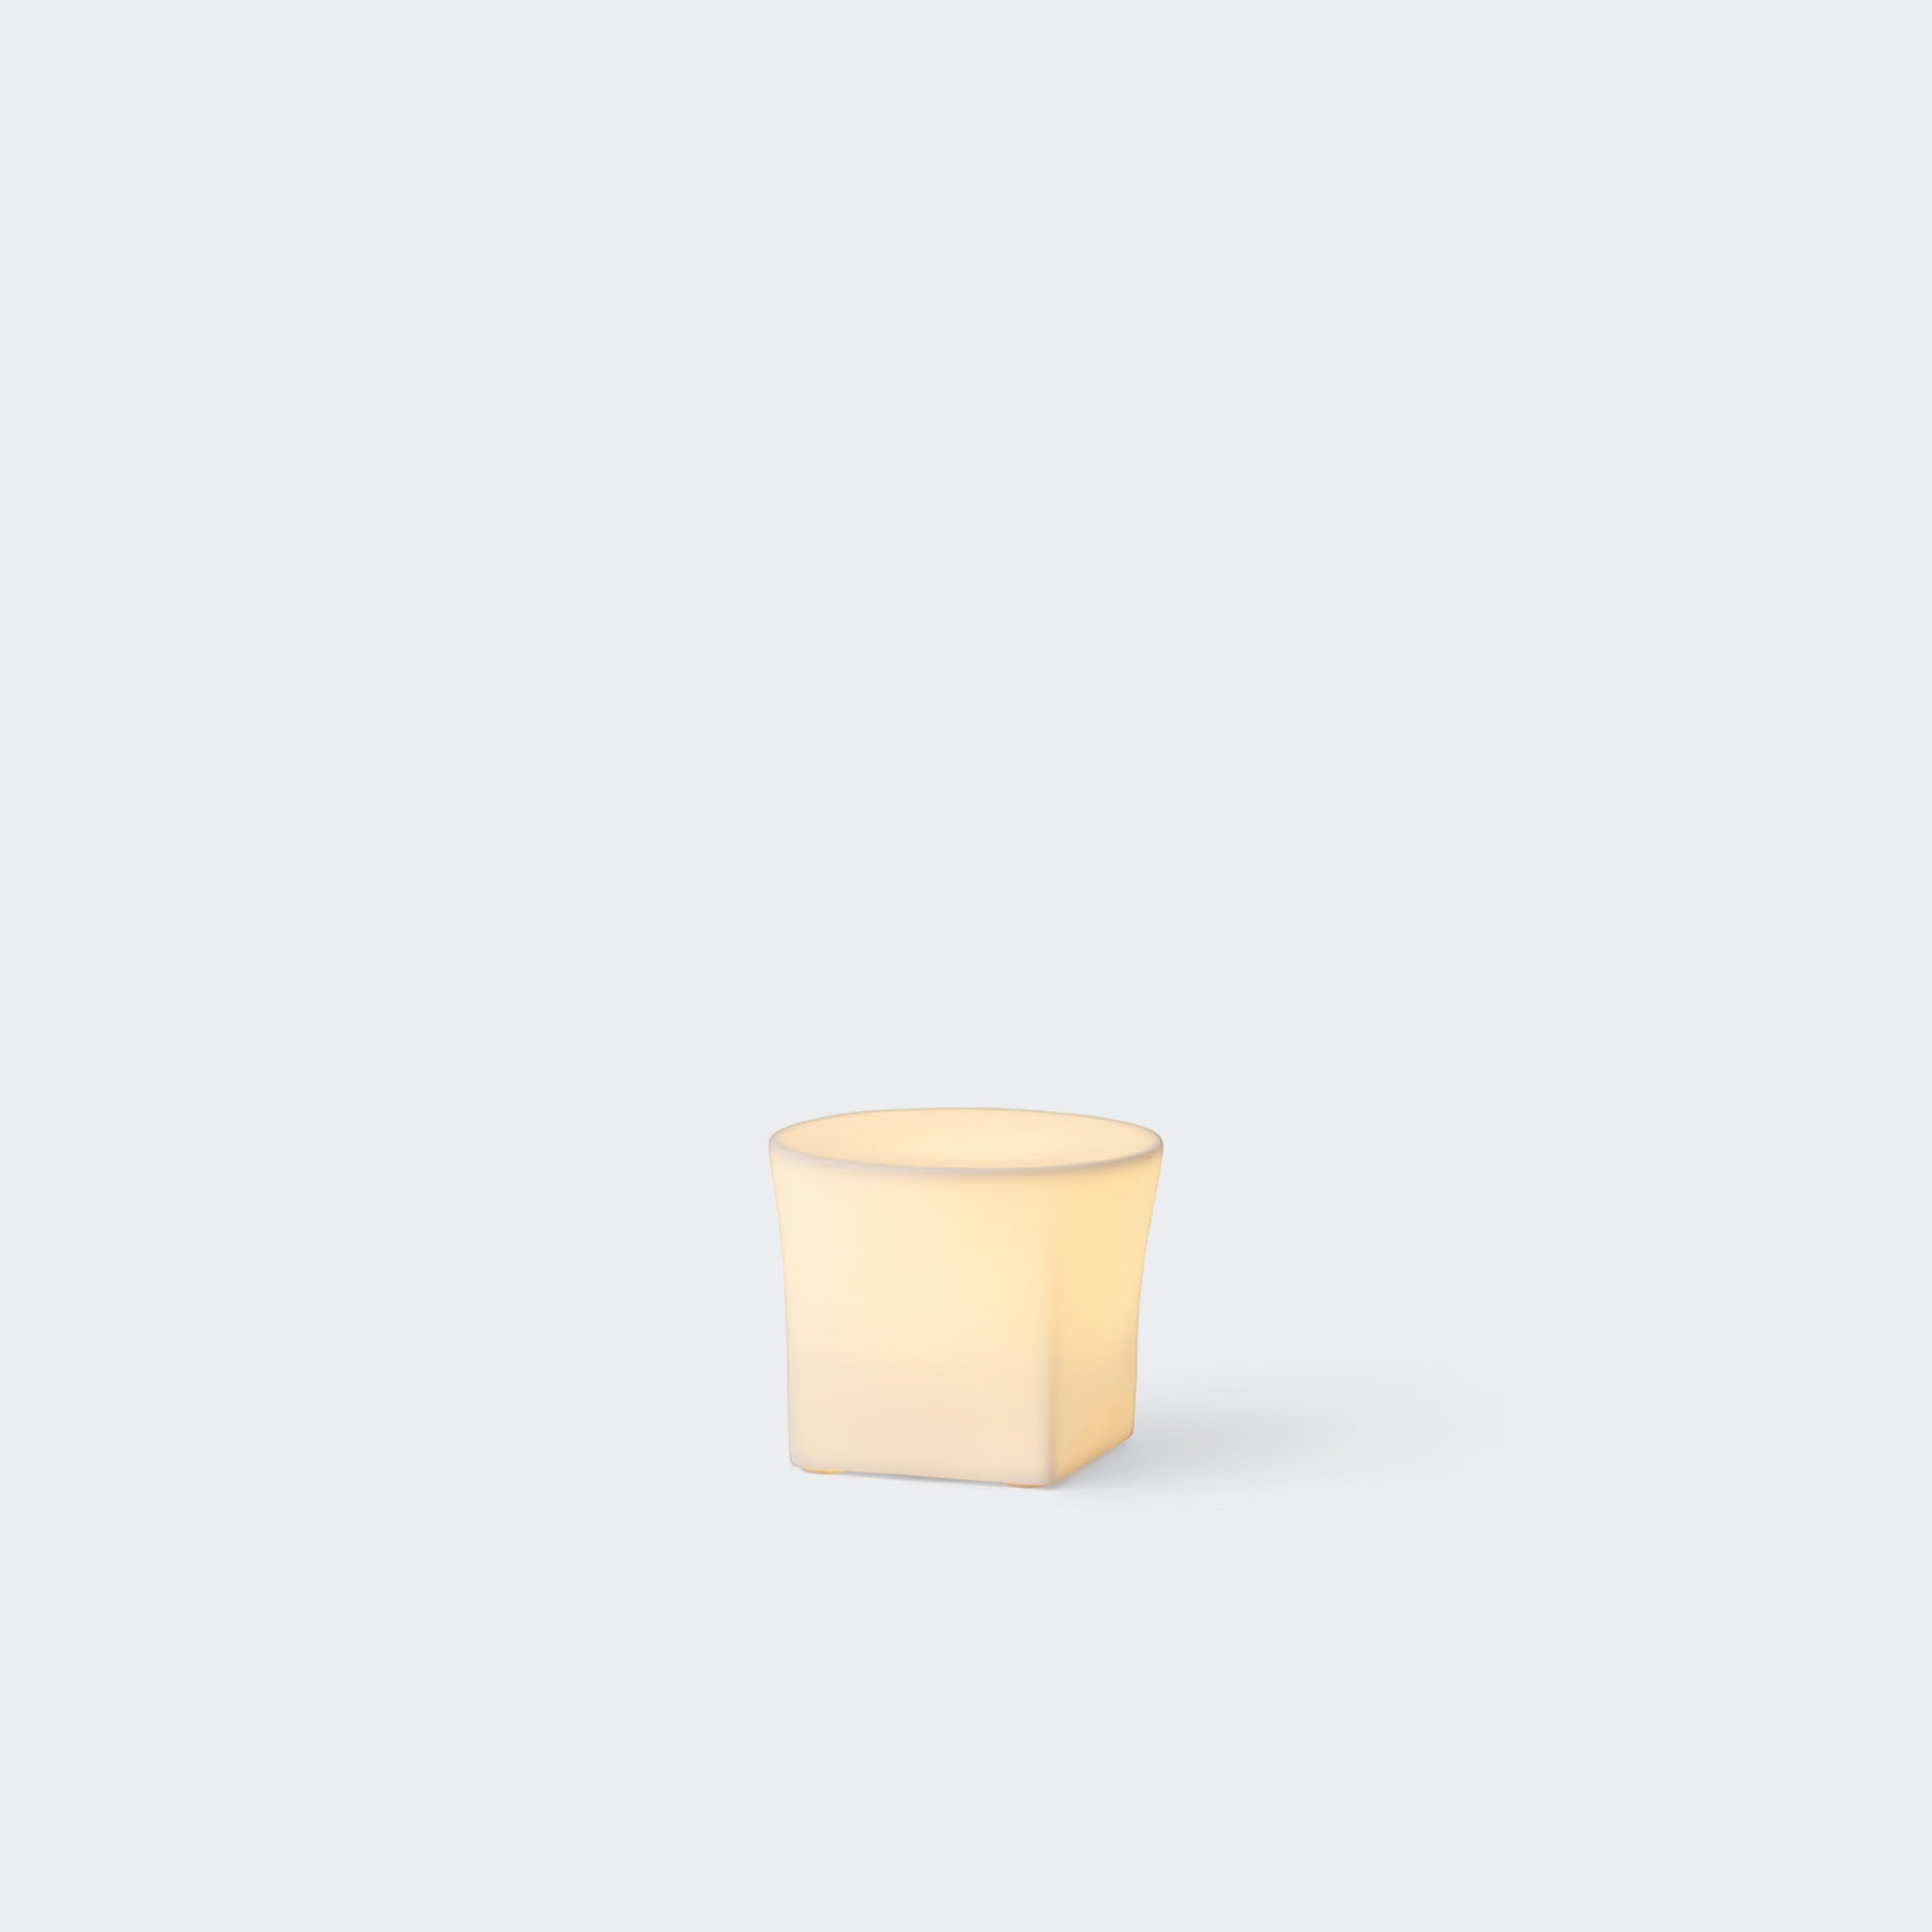 Audo Copenhagen Ignus Flameless Candle 3in - KANSO#Select Size_3in